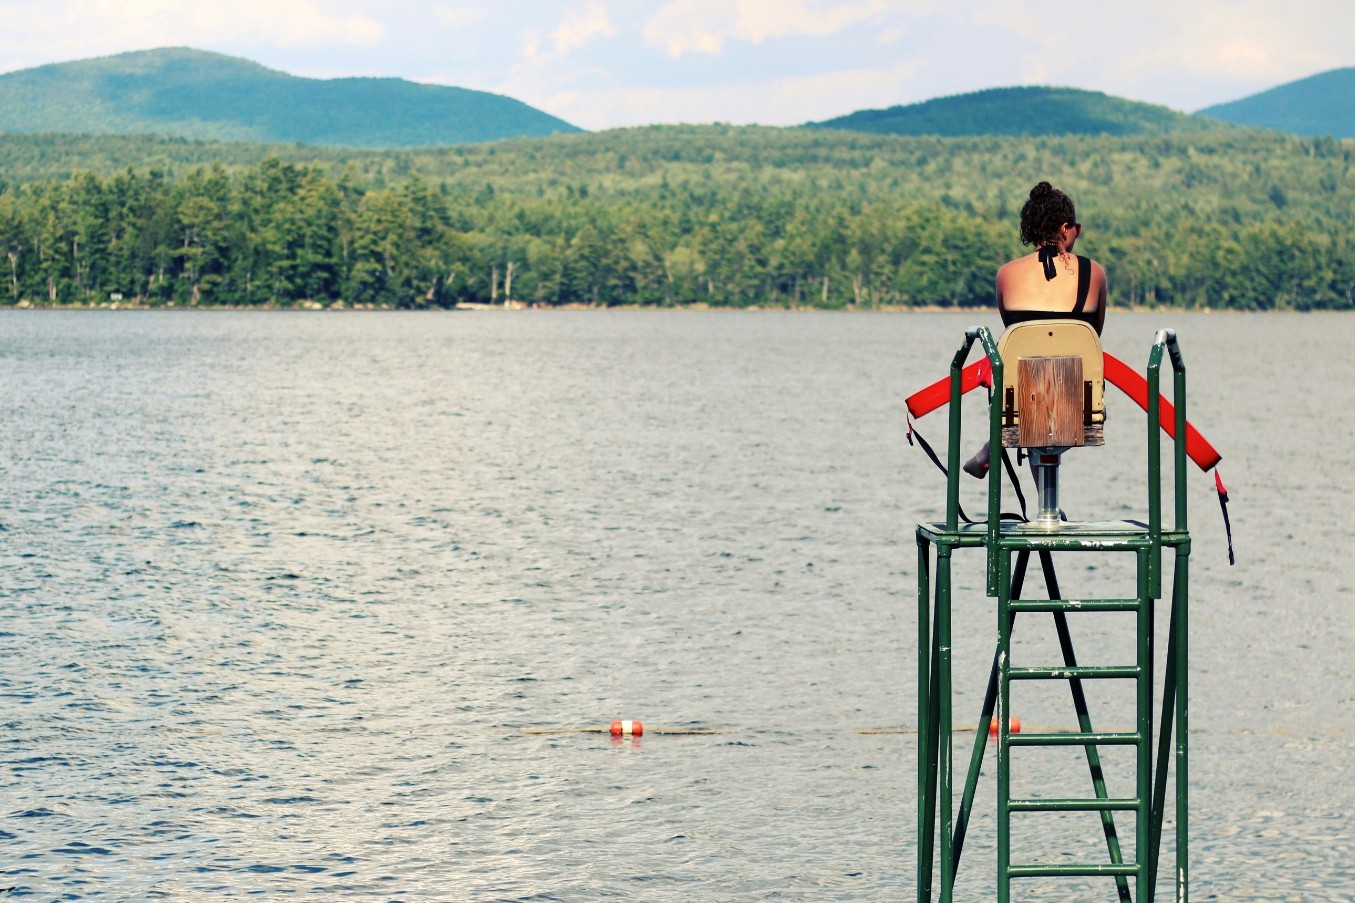 We couldn’t swim without lifeguards: How you can get involved